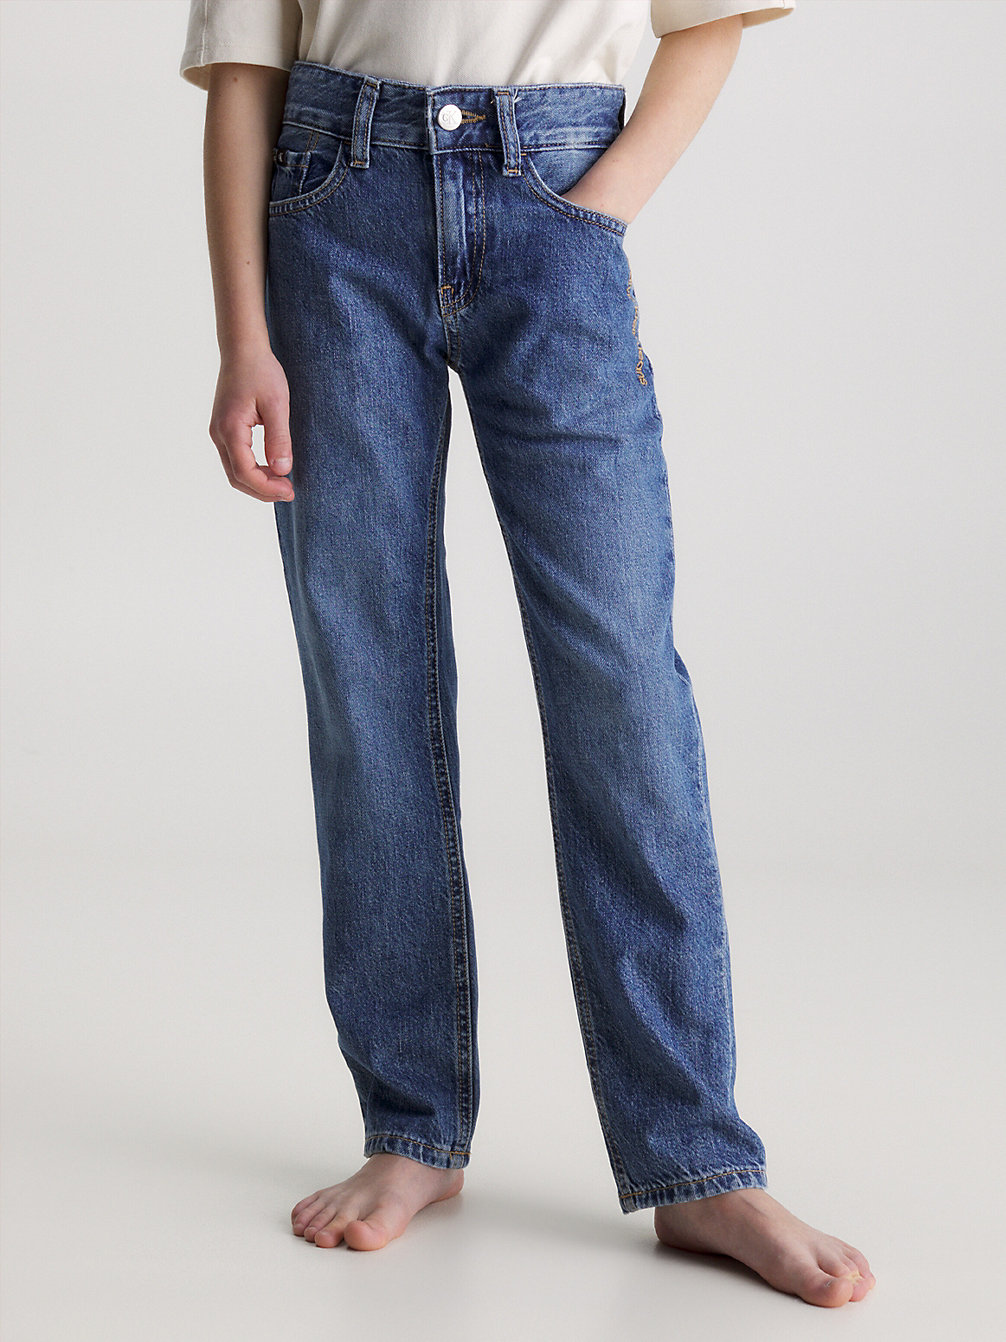 Mid Rise Straight Jeans > AUTHENTIC VINTAGE EMBRO > undefined nino > Calvin Klein